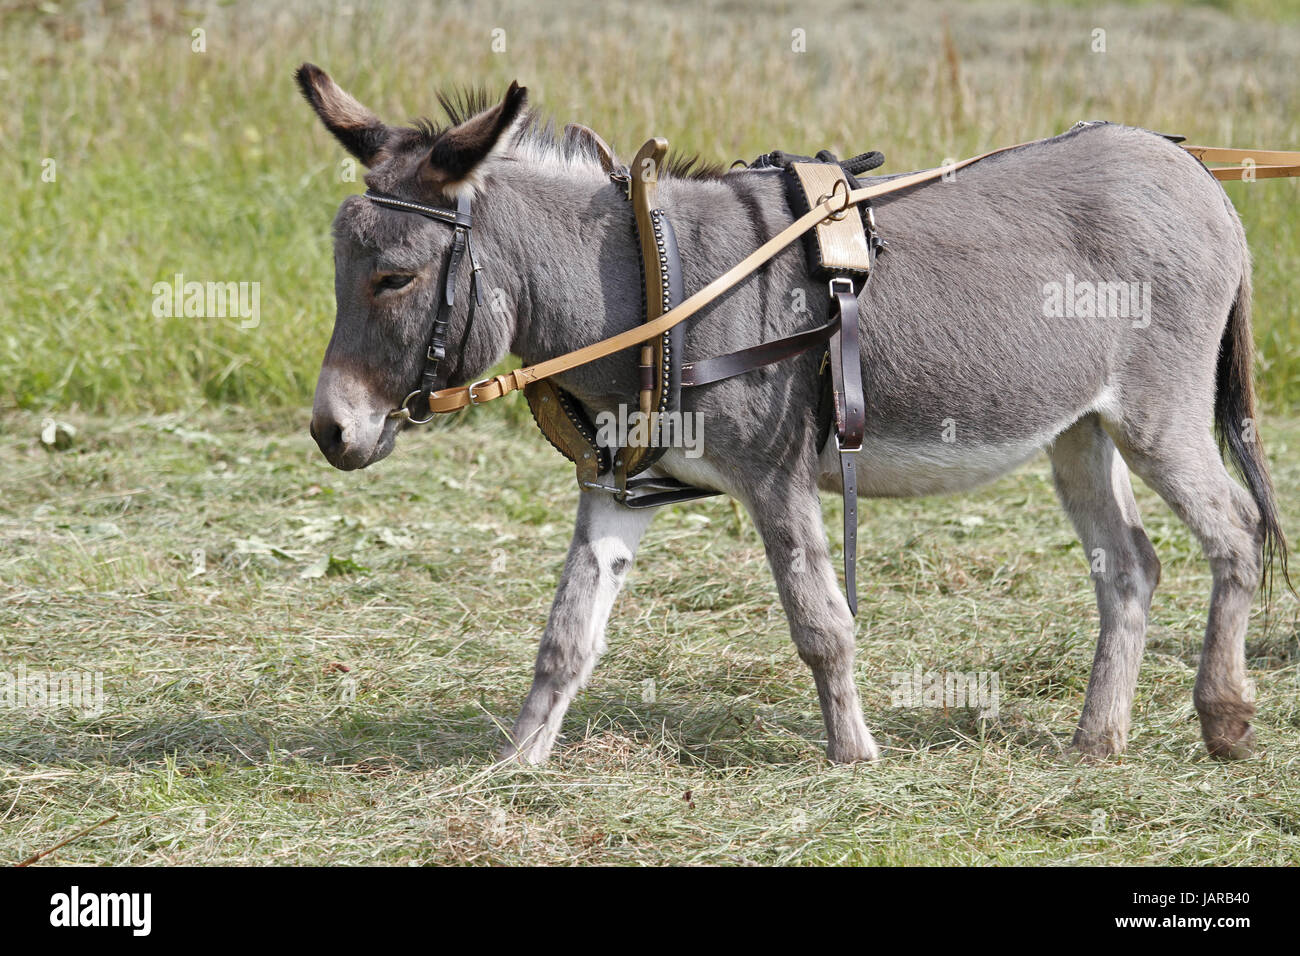 Kummet High Resolution Stock Photography and Images - Alamy